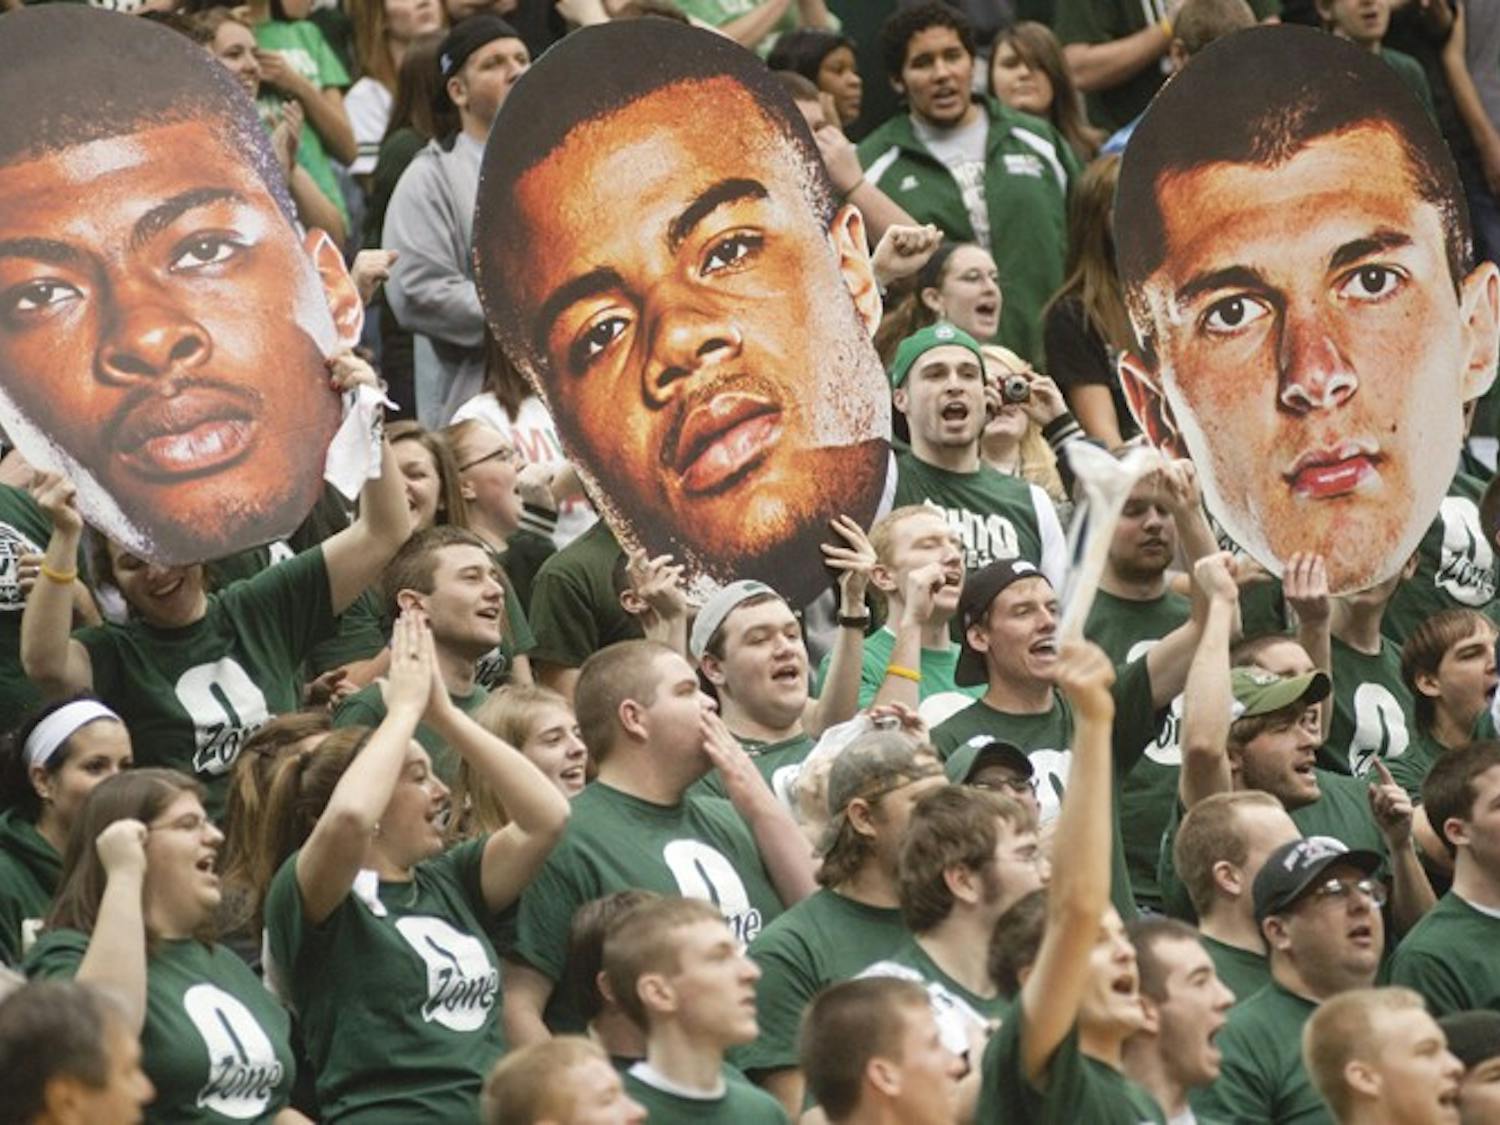 Ohio's O Zone requires student involvement to boost spirits  